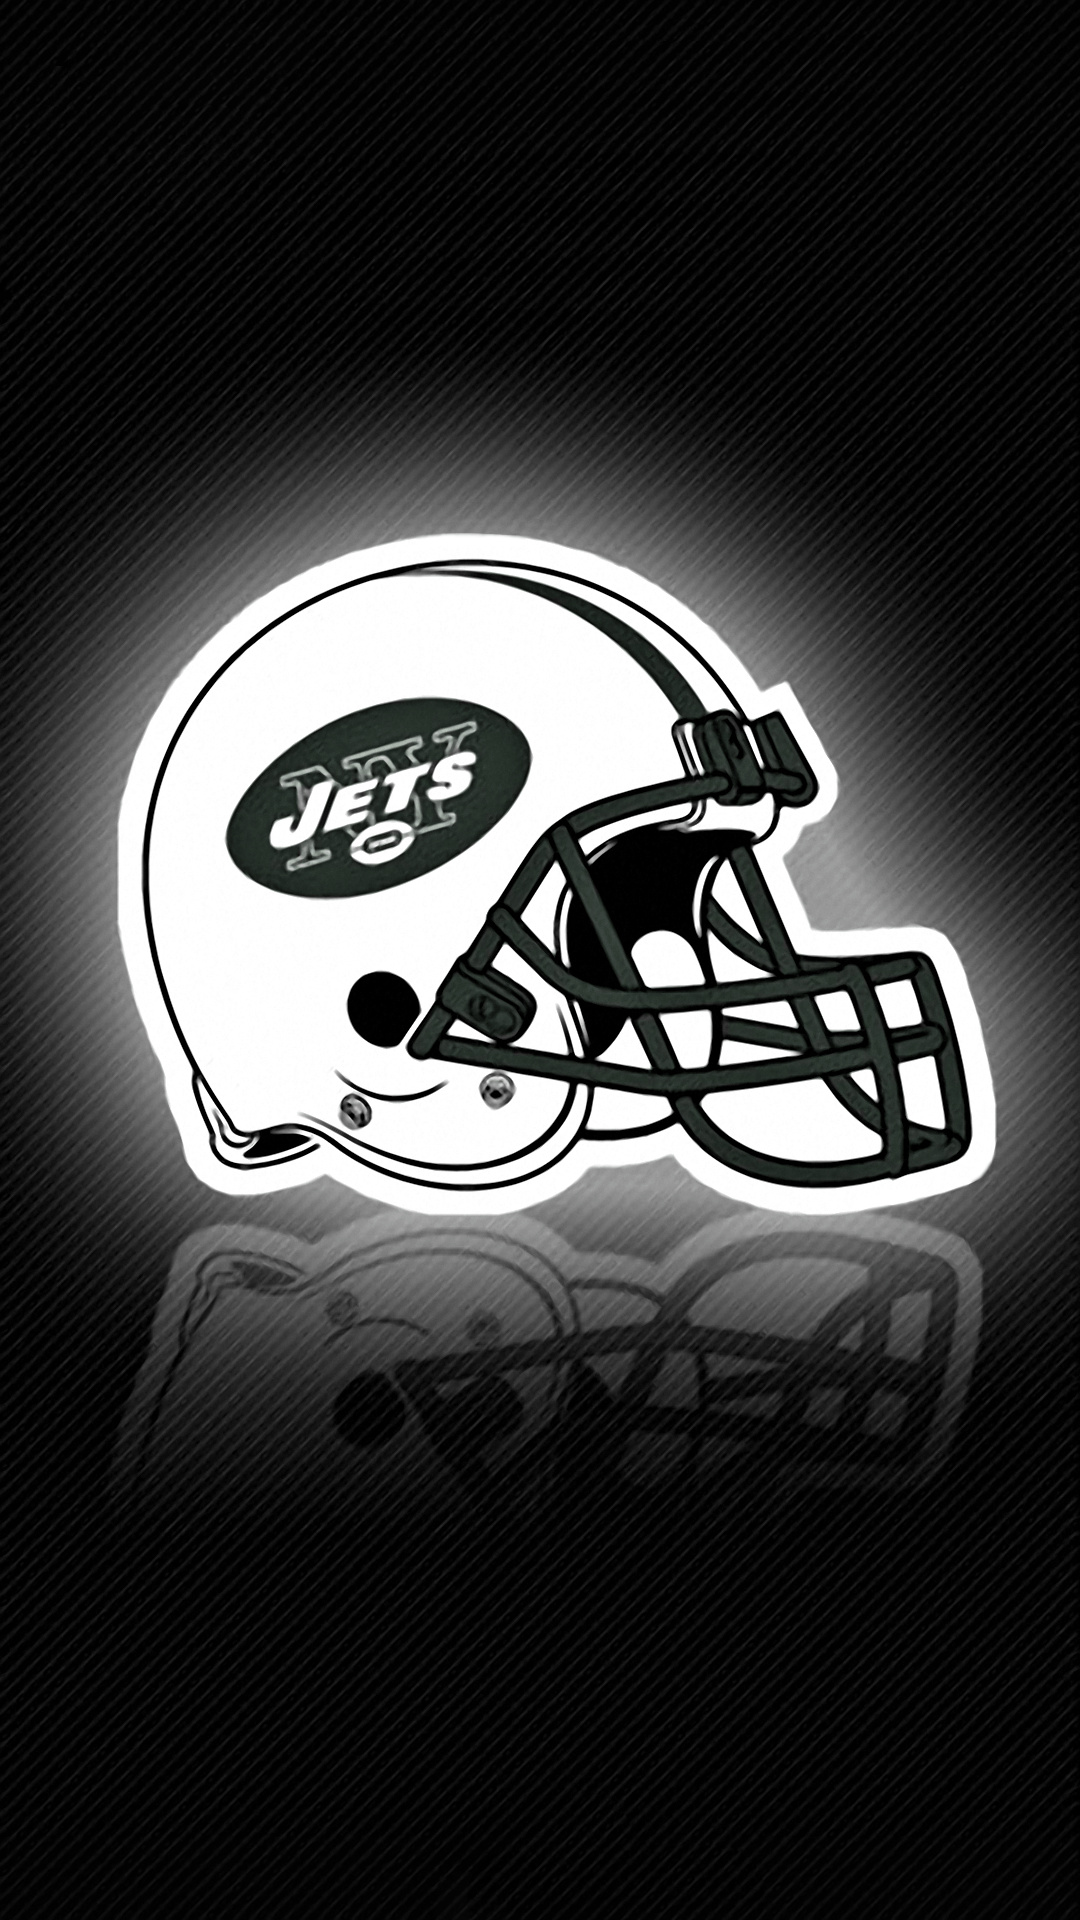 New York Jets, Top free wallpapers, Jets backgrounds, Sports team, 1080x1920 Full HD Phone